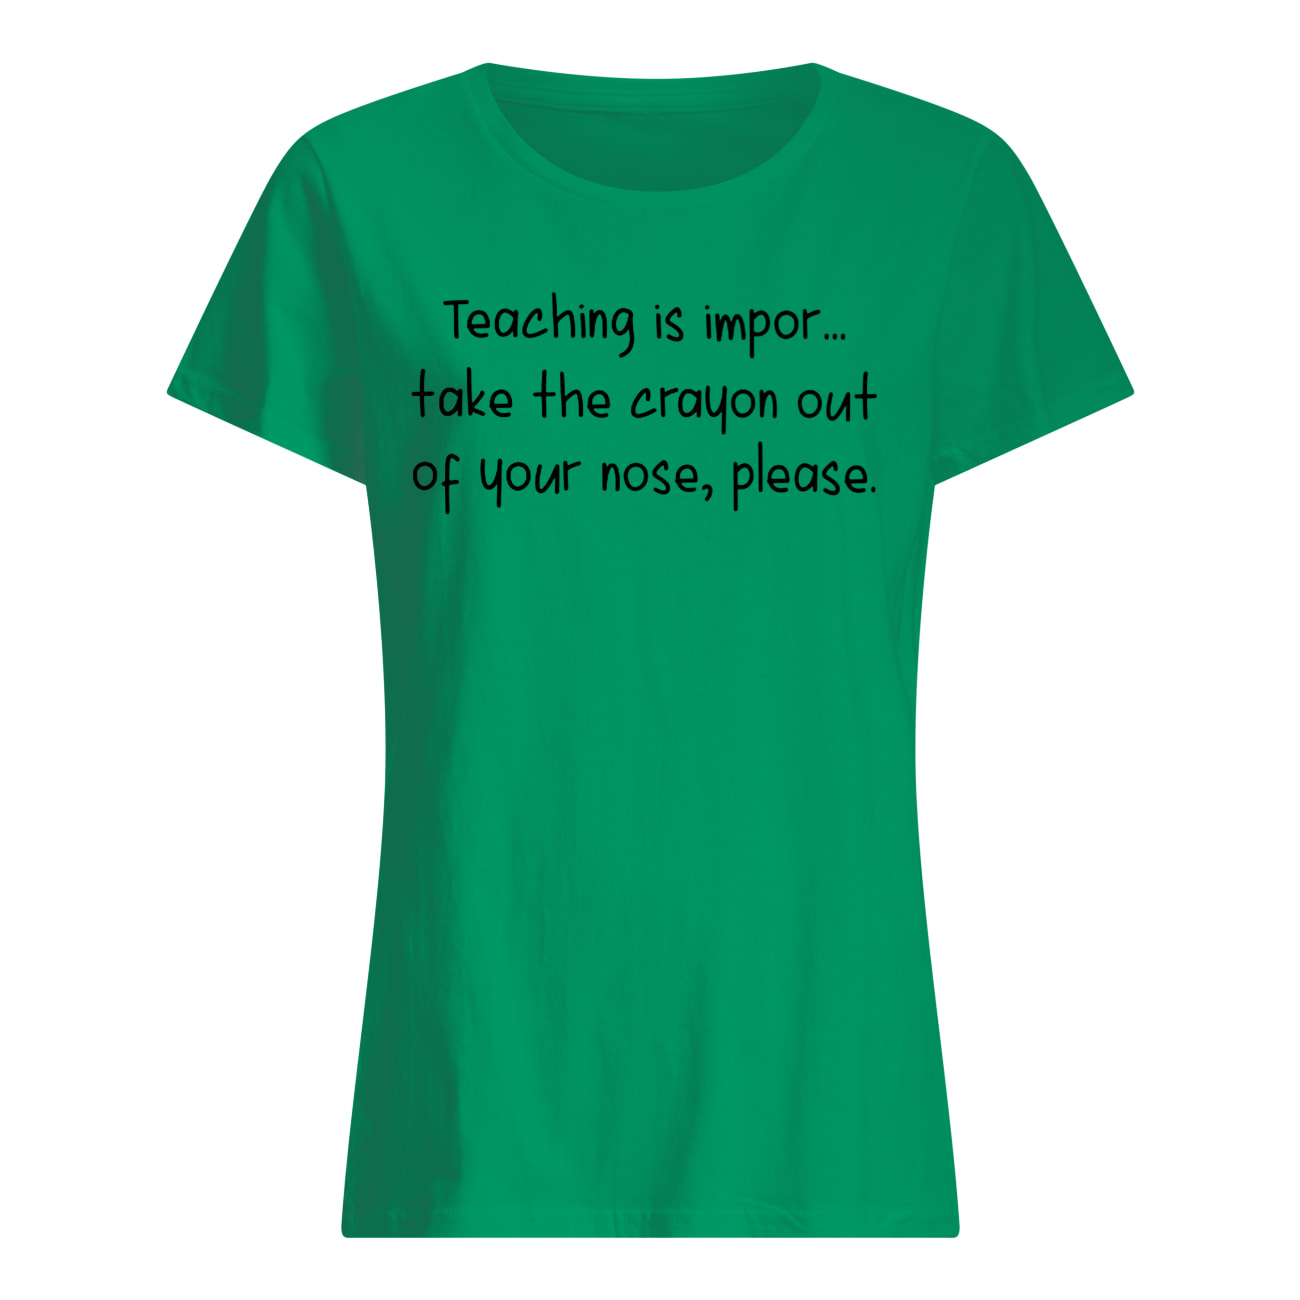 Teaching is impor take the crayon out of your nose please womens shirt